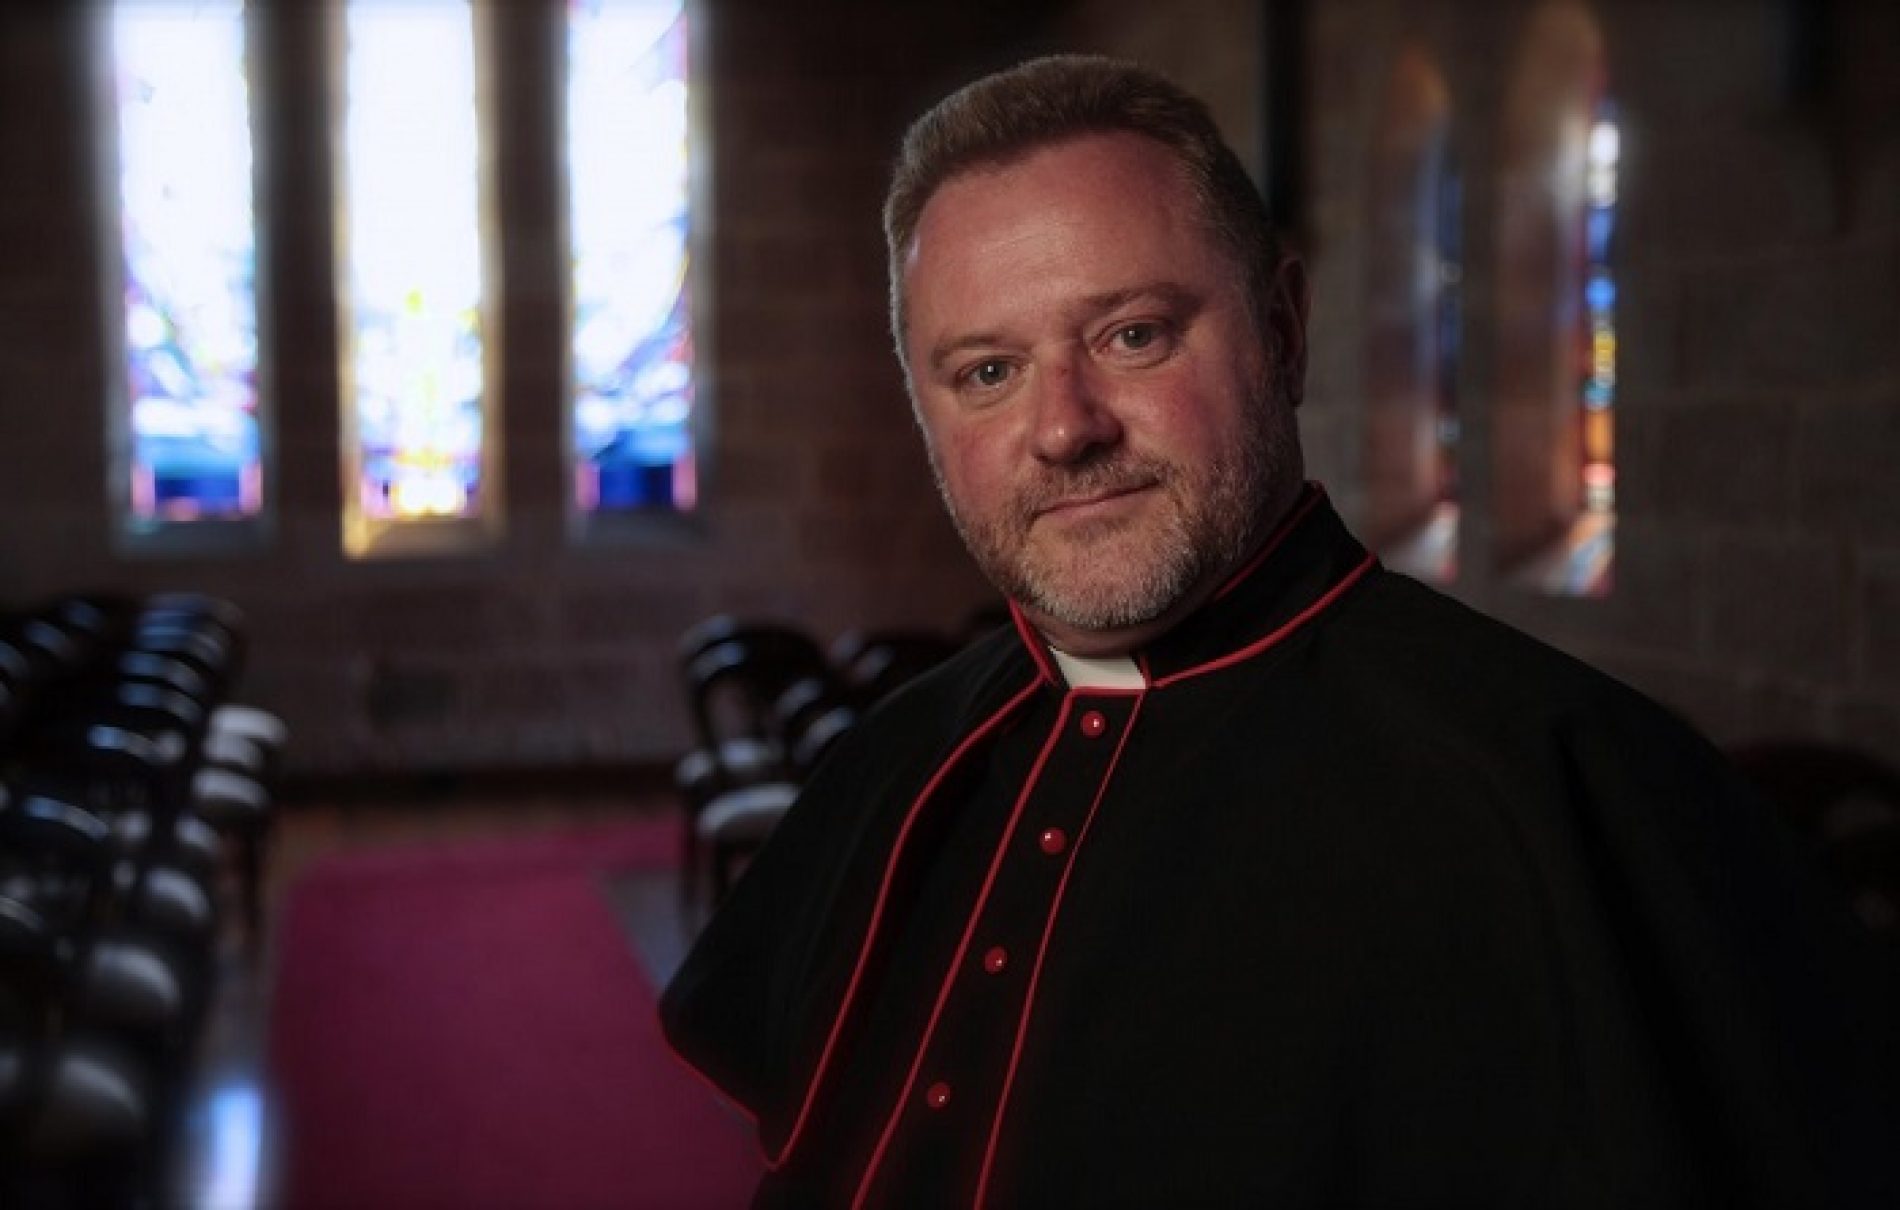 “The authors of the Bible had no idea that same sex attraction was a thing.” – Anglican priest, Father Rod Bower, says